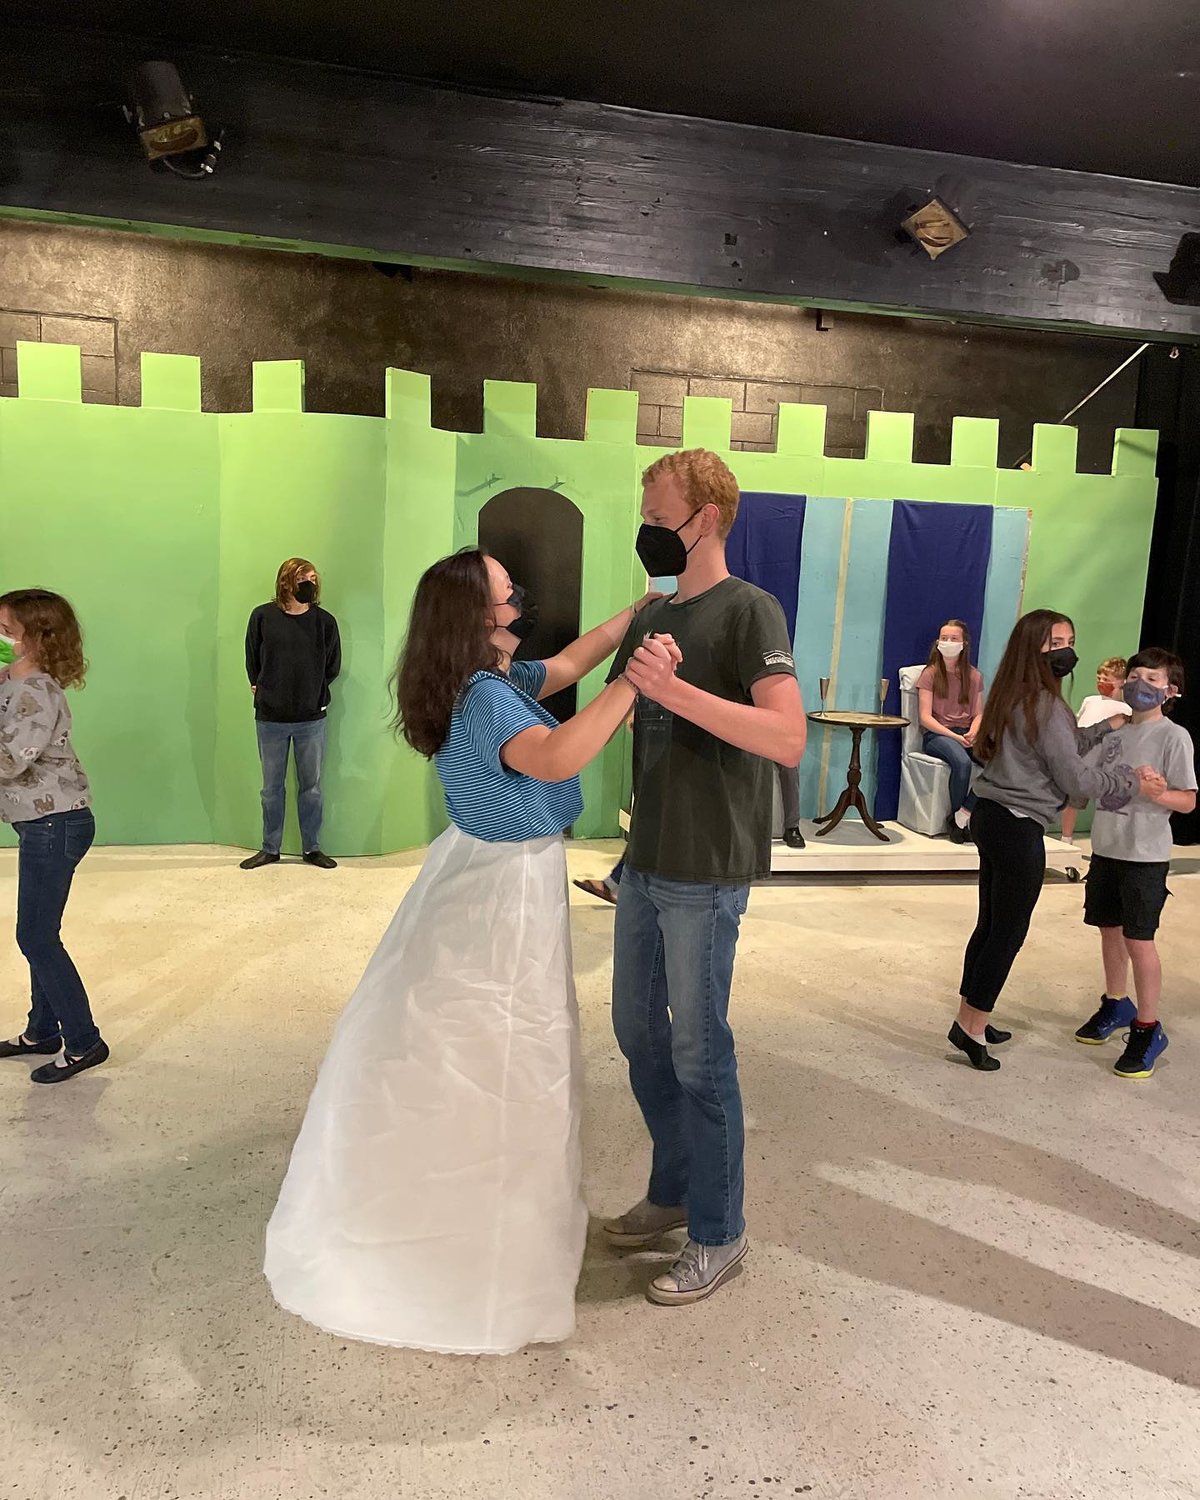 Actors rehearse “Cinderella” in this photograph provided by TOAD.